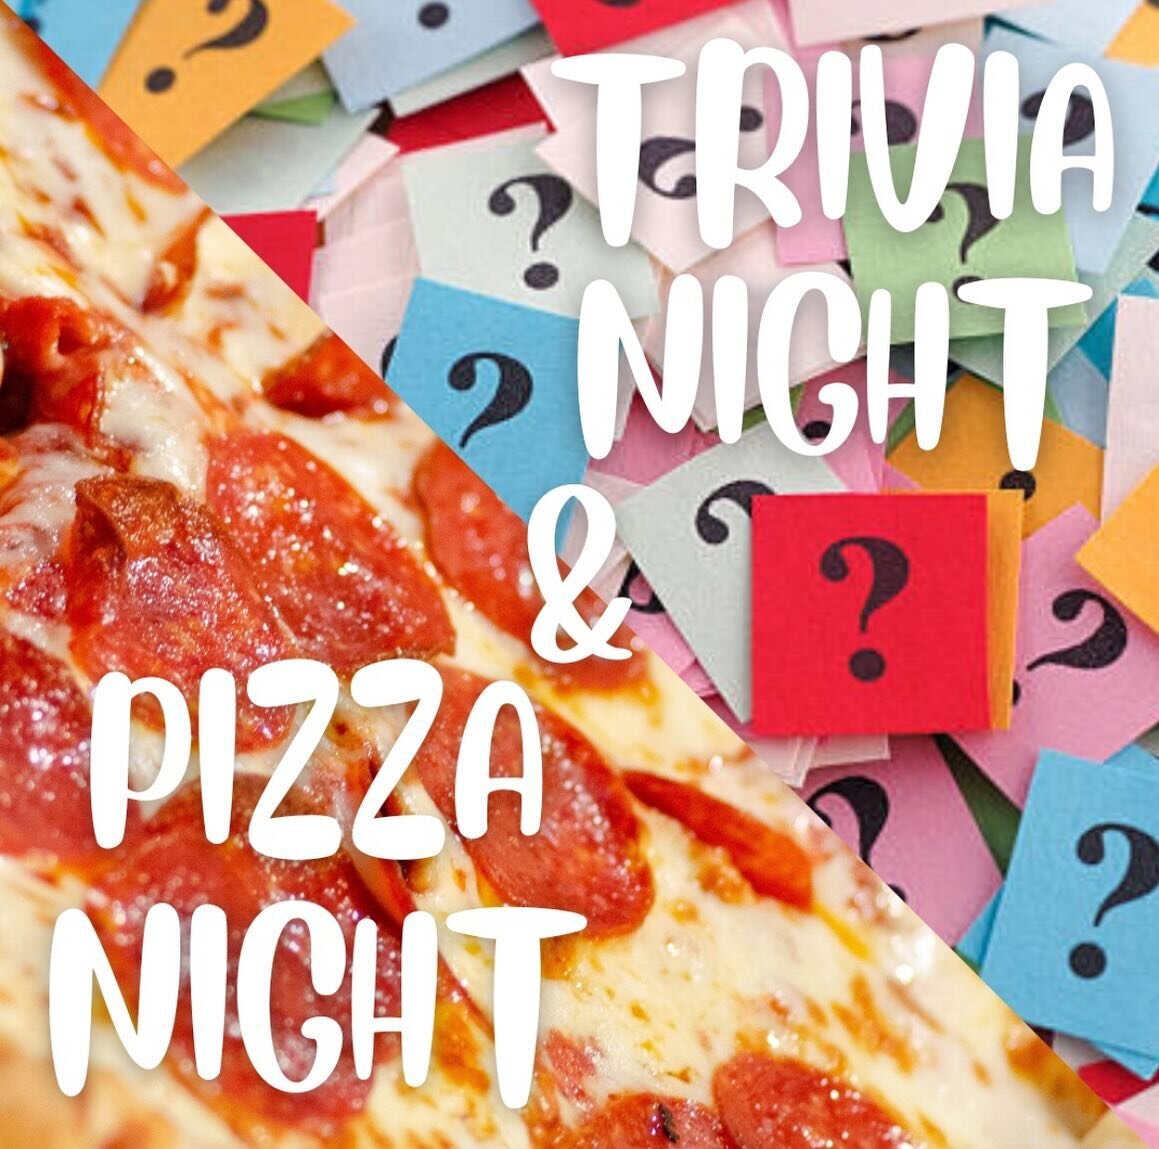 This week we&rsquo;ll kick off the night at 6:30 with some delicious pizza! After that, we&rsquo;ll talk about that feeling that we get that we&rsquo;re out of place or don&rsquo;t quite belong because of our faith and values. We&rsquo;ll learn how t